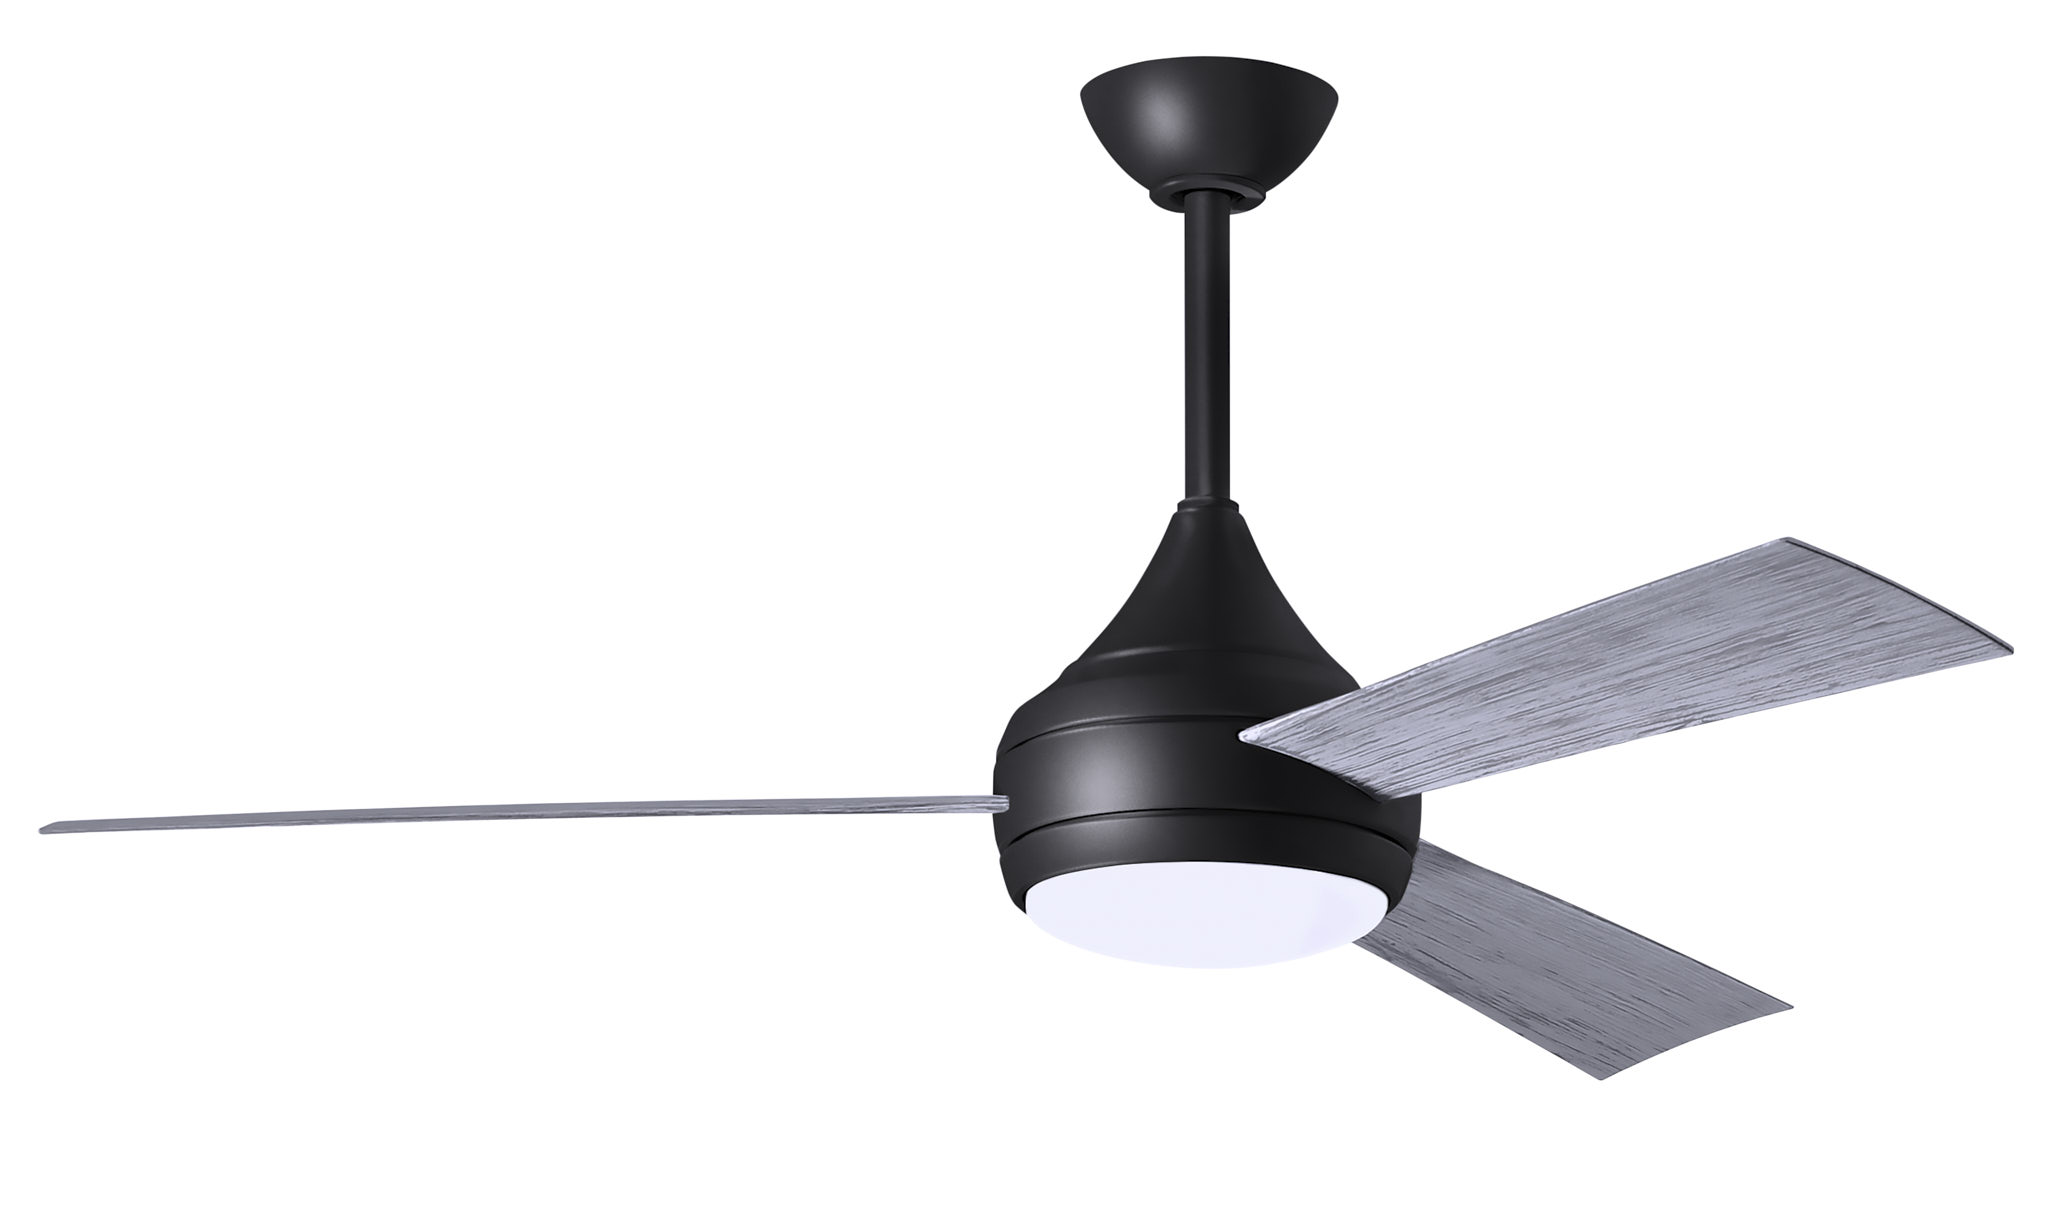 Donaire ceiling fan in Matte Black with Barn Wood blades without light cap manufactured by Matthews Fan Company.